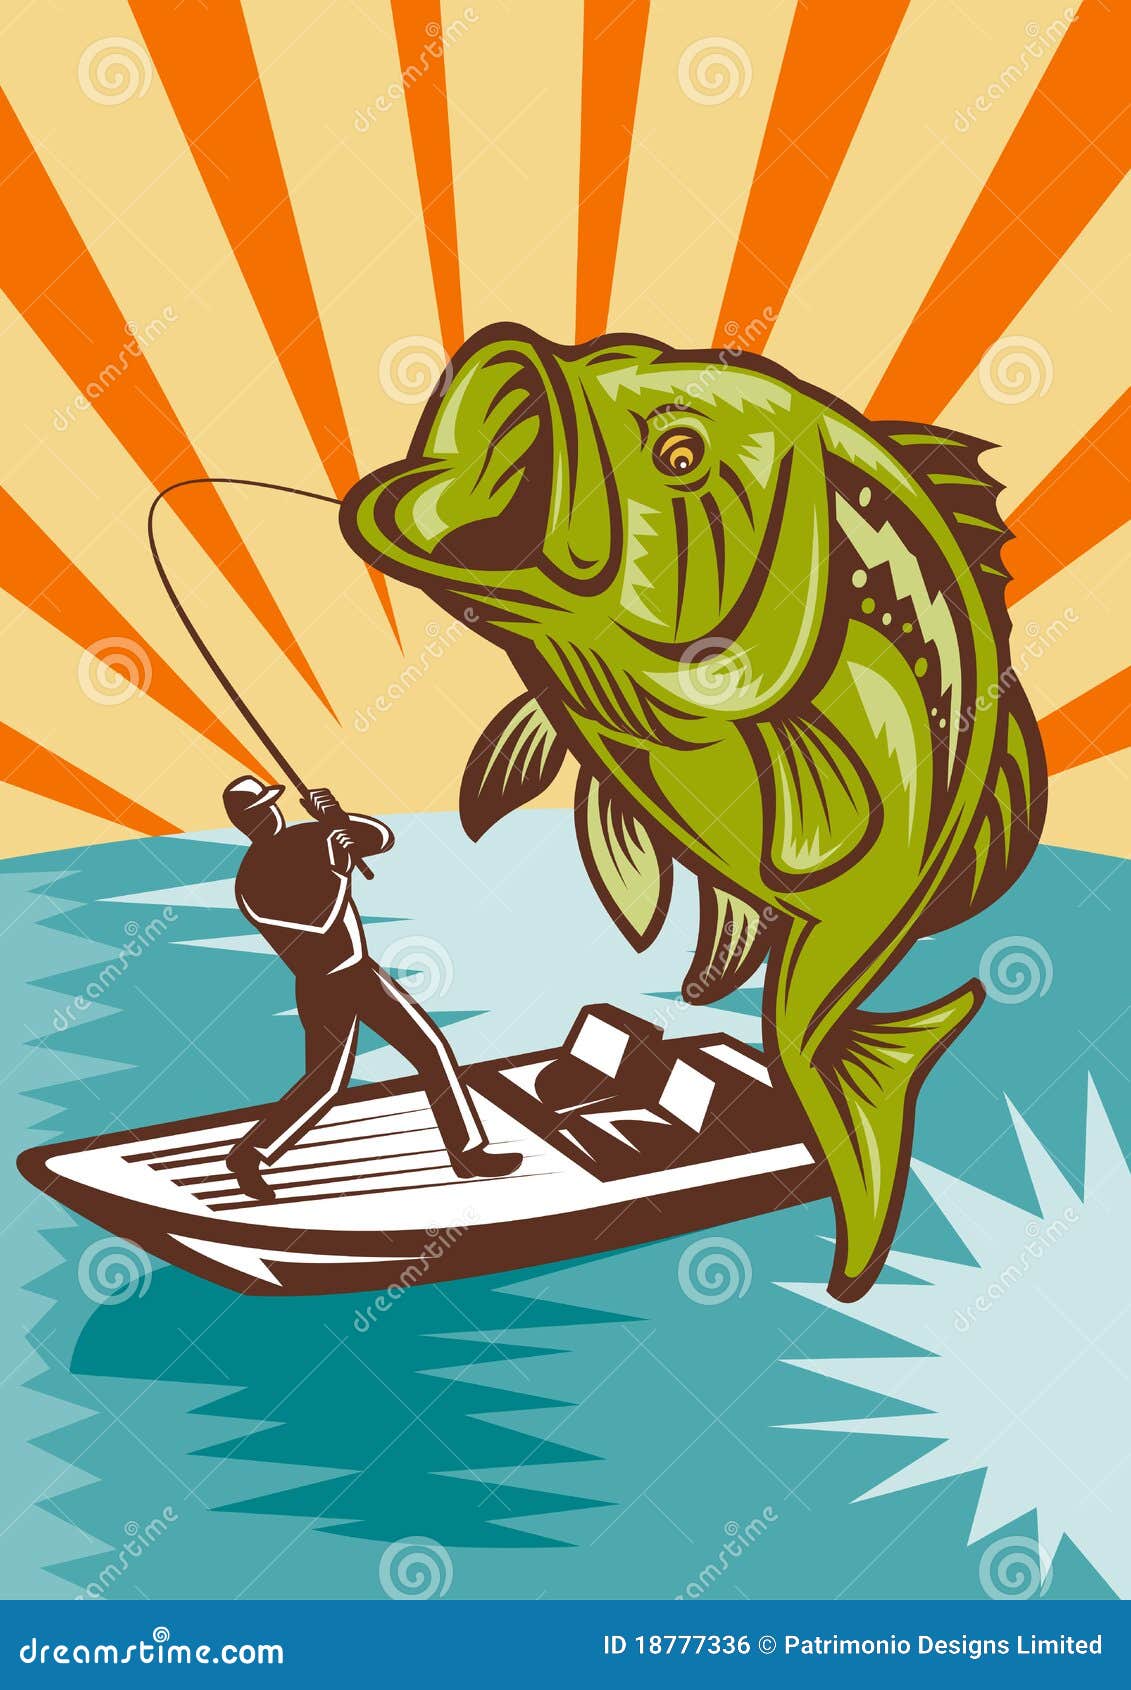 Bass Fish Jumping Out of Water Clip Art